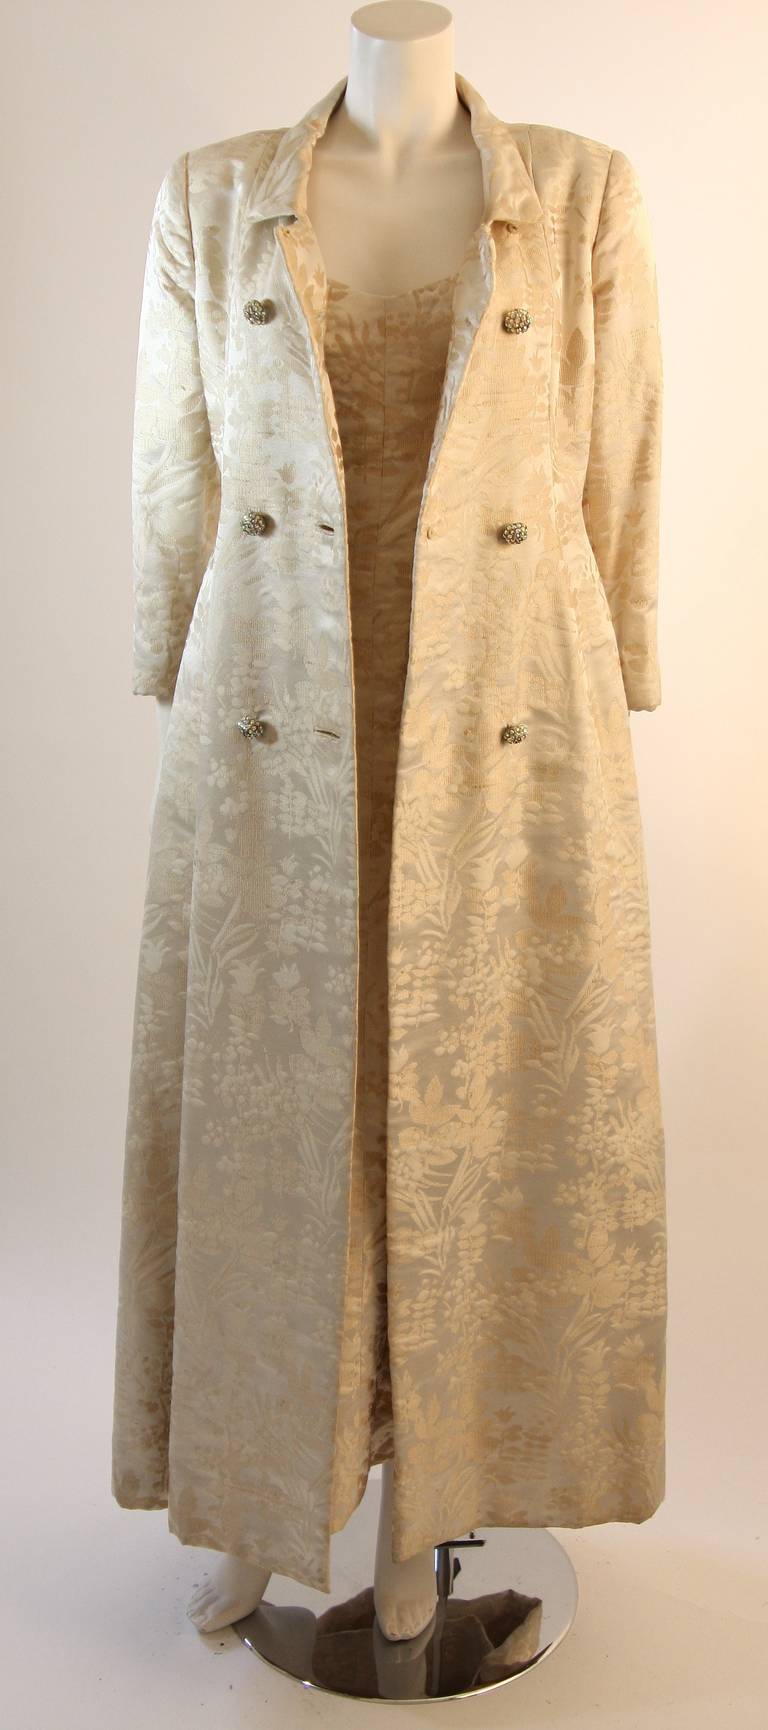 This is a Ben Zuckerman for Amelia Gray of Beverly Hills design. This set features two pieces, a wonderful full length dress and beautiful evening coat. The set is composed of a fabulous cream and off white brocade fabric. The double breast coat is